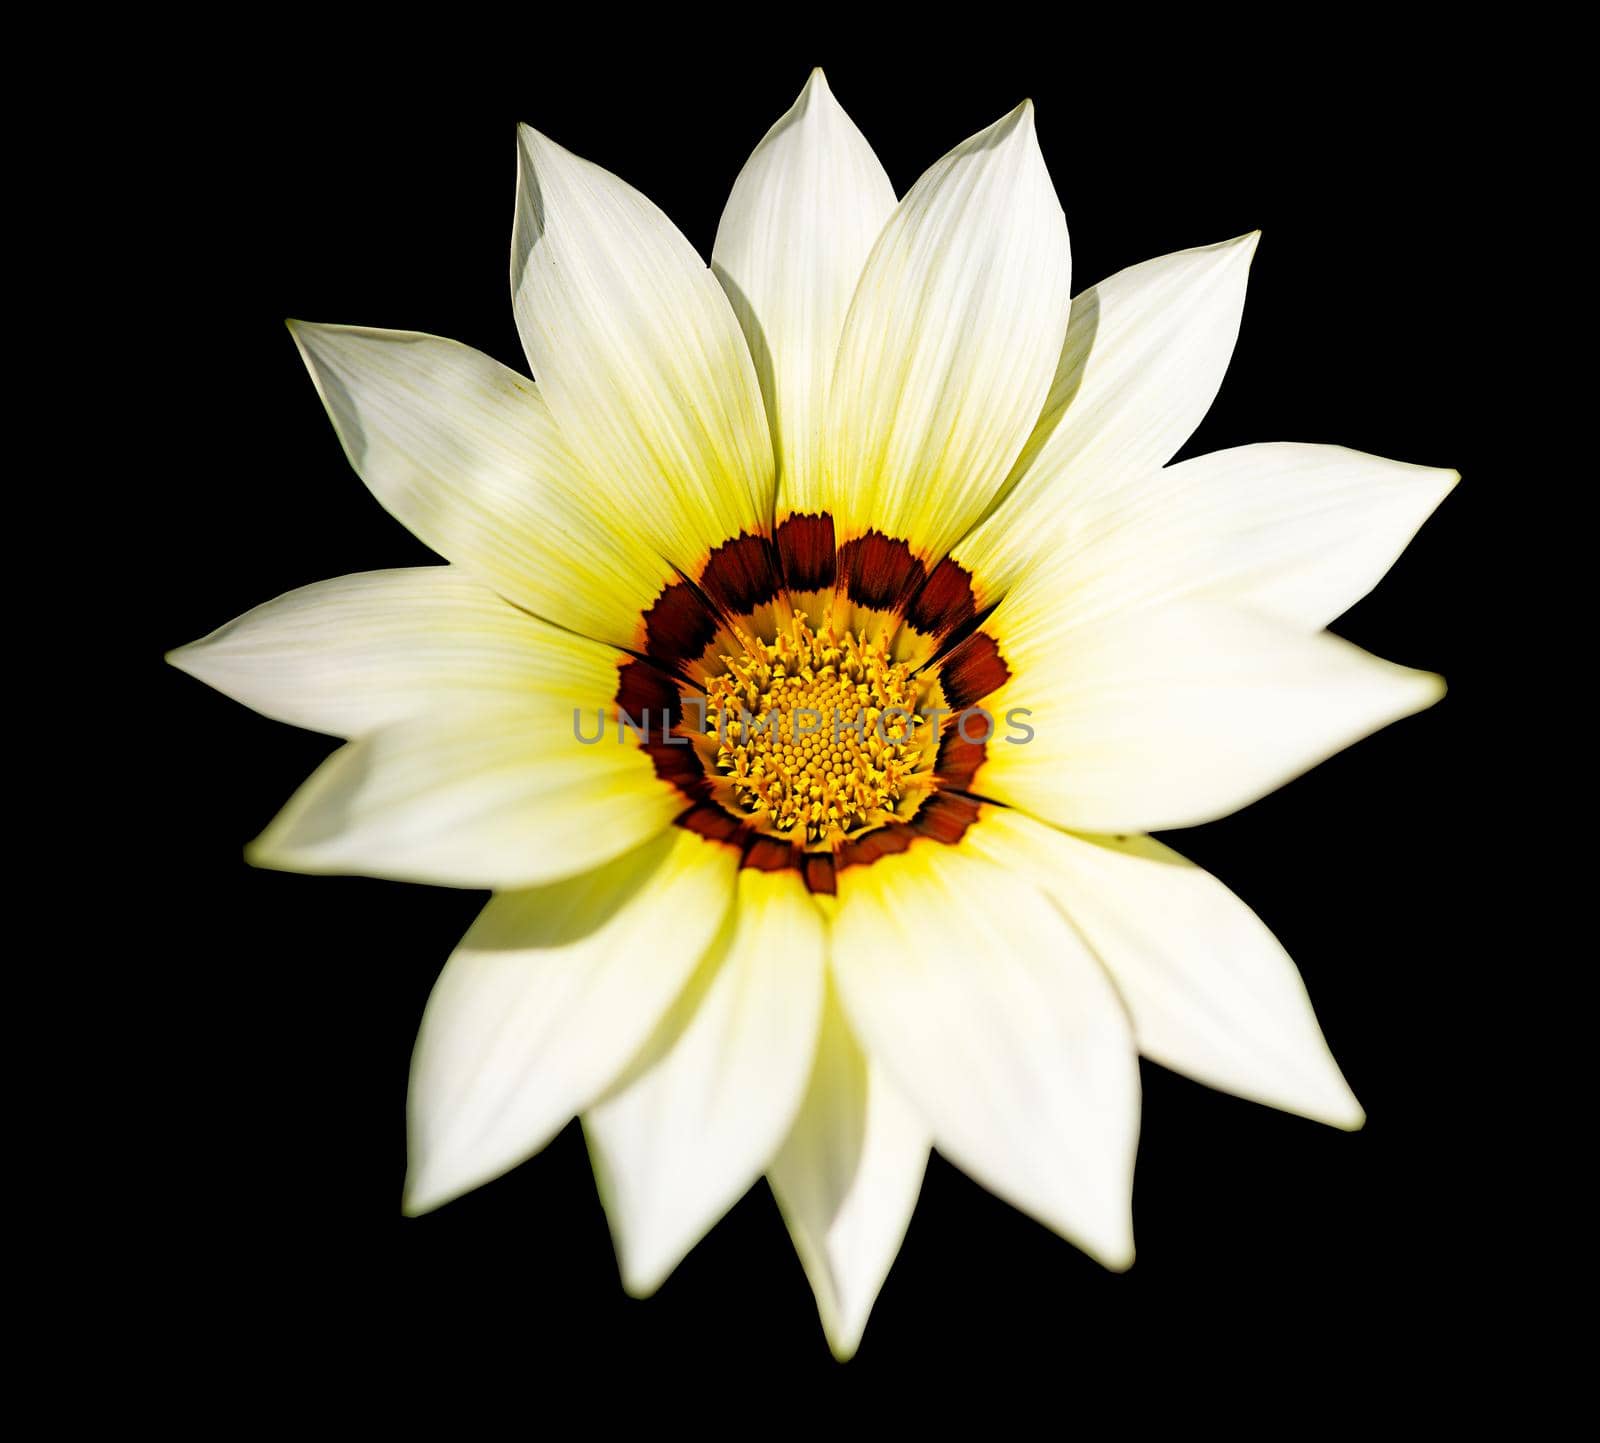 decorative yellow flower on black background, isolated object